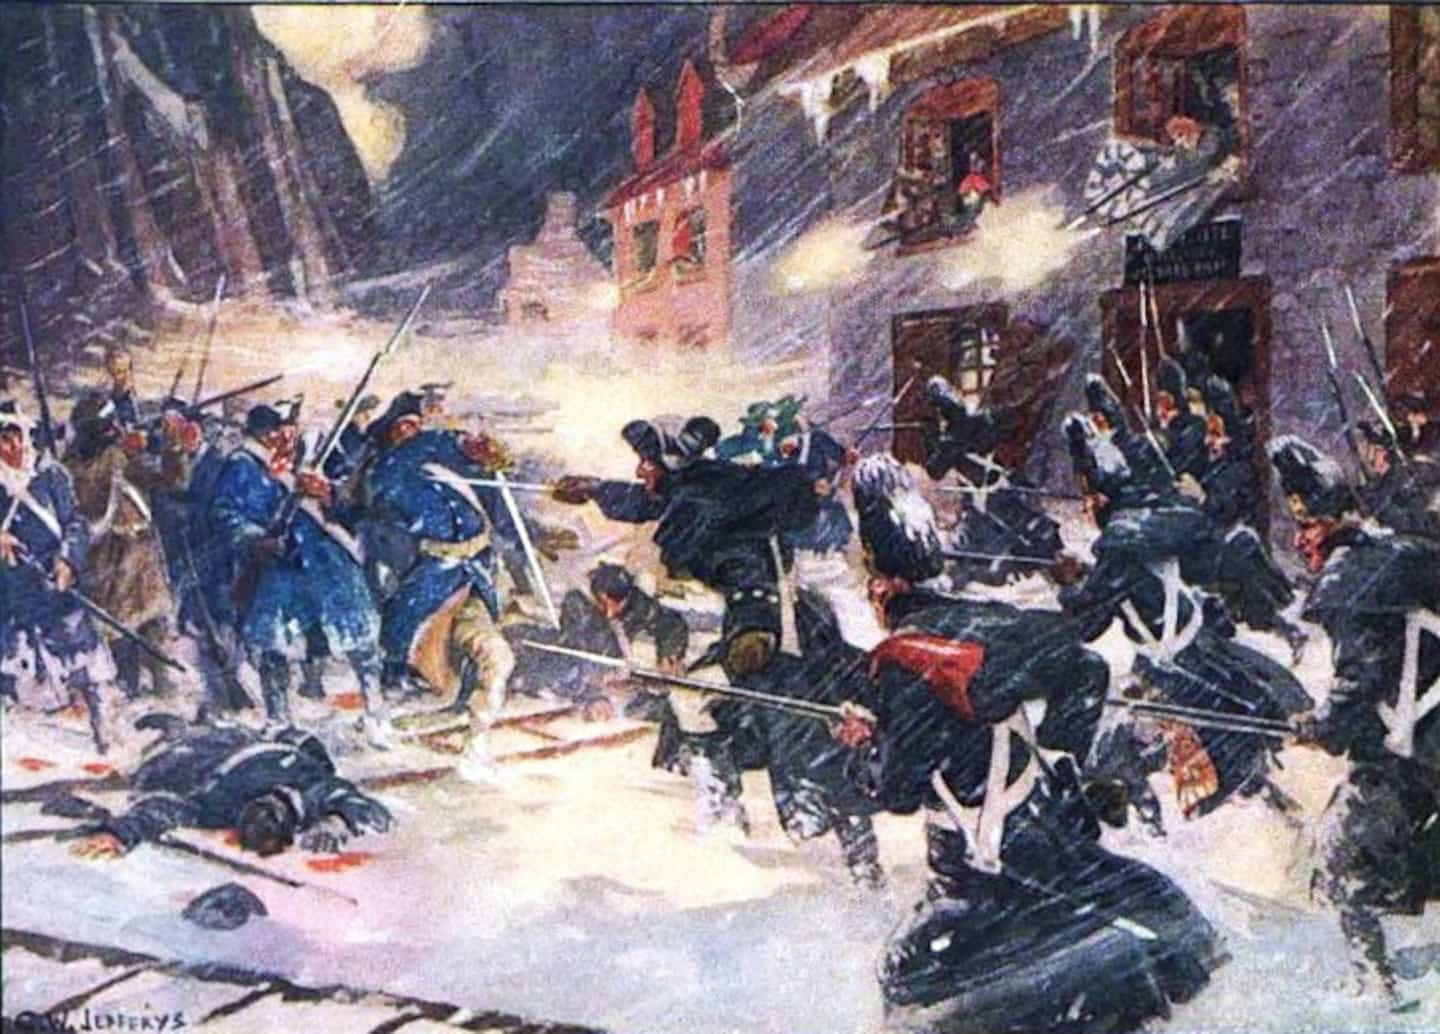 Quebec in stories: on December 31, 1775, Quebec almost became an American state